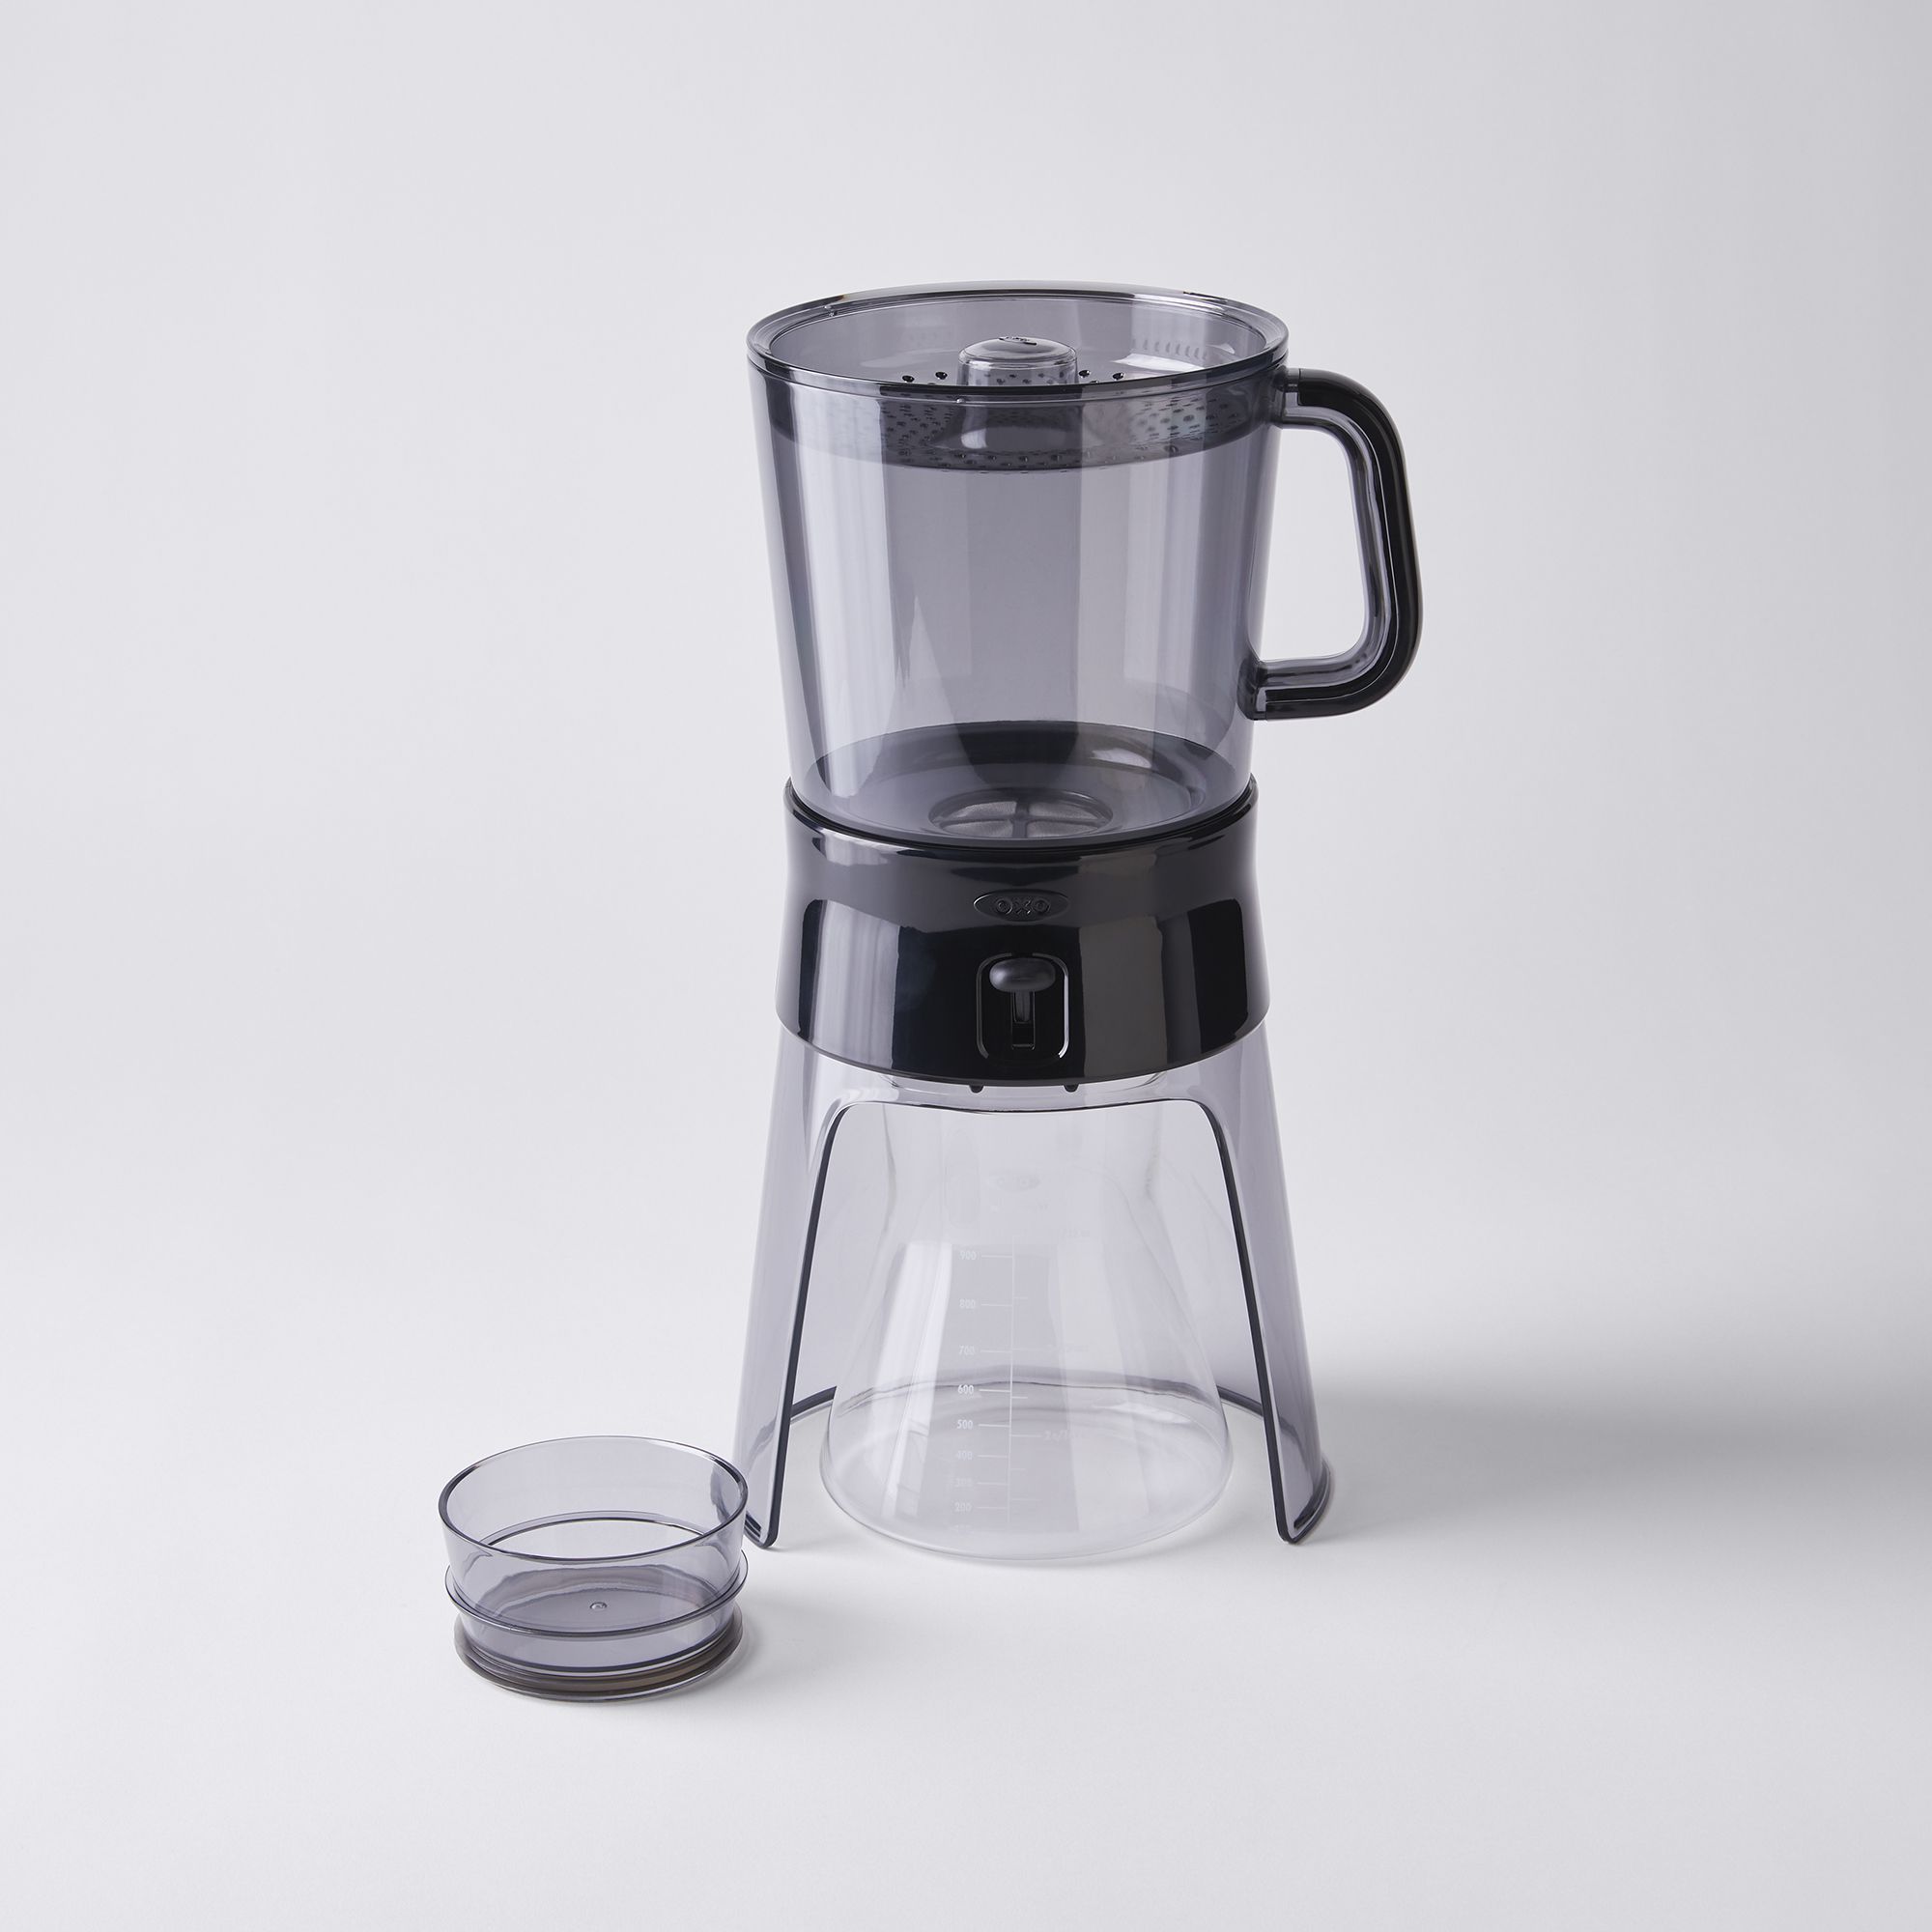 I Tried the OXO Cold Brew Coffee Maker 